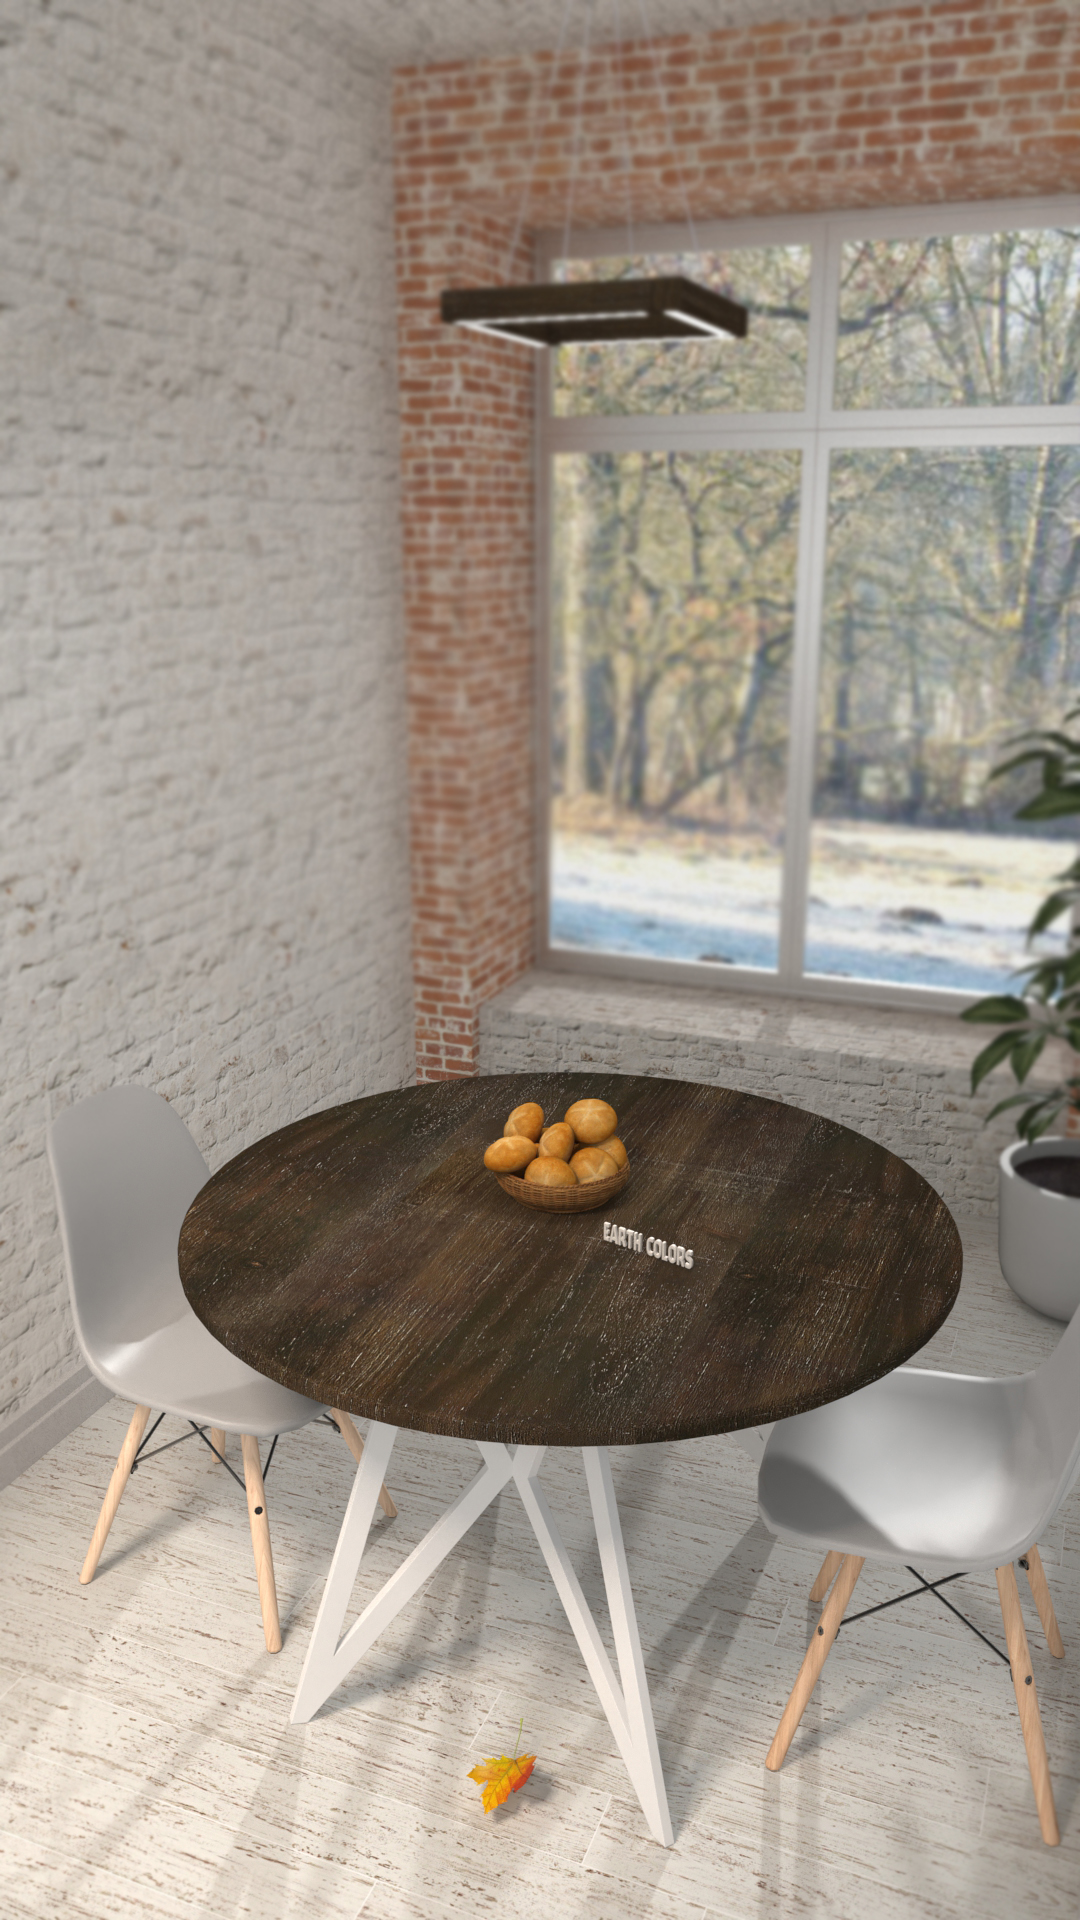 Small round dining table and chairs